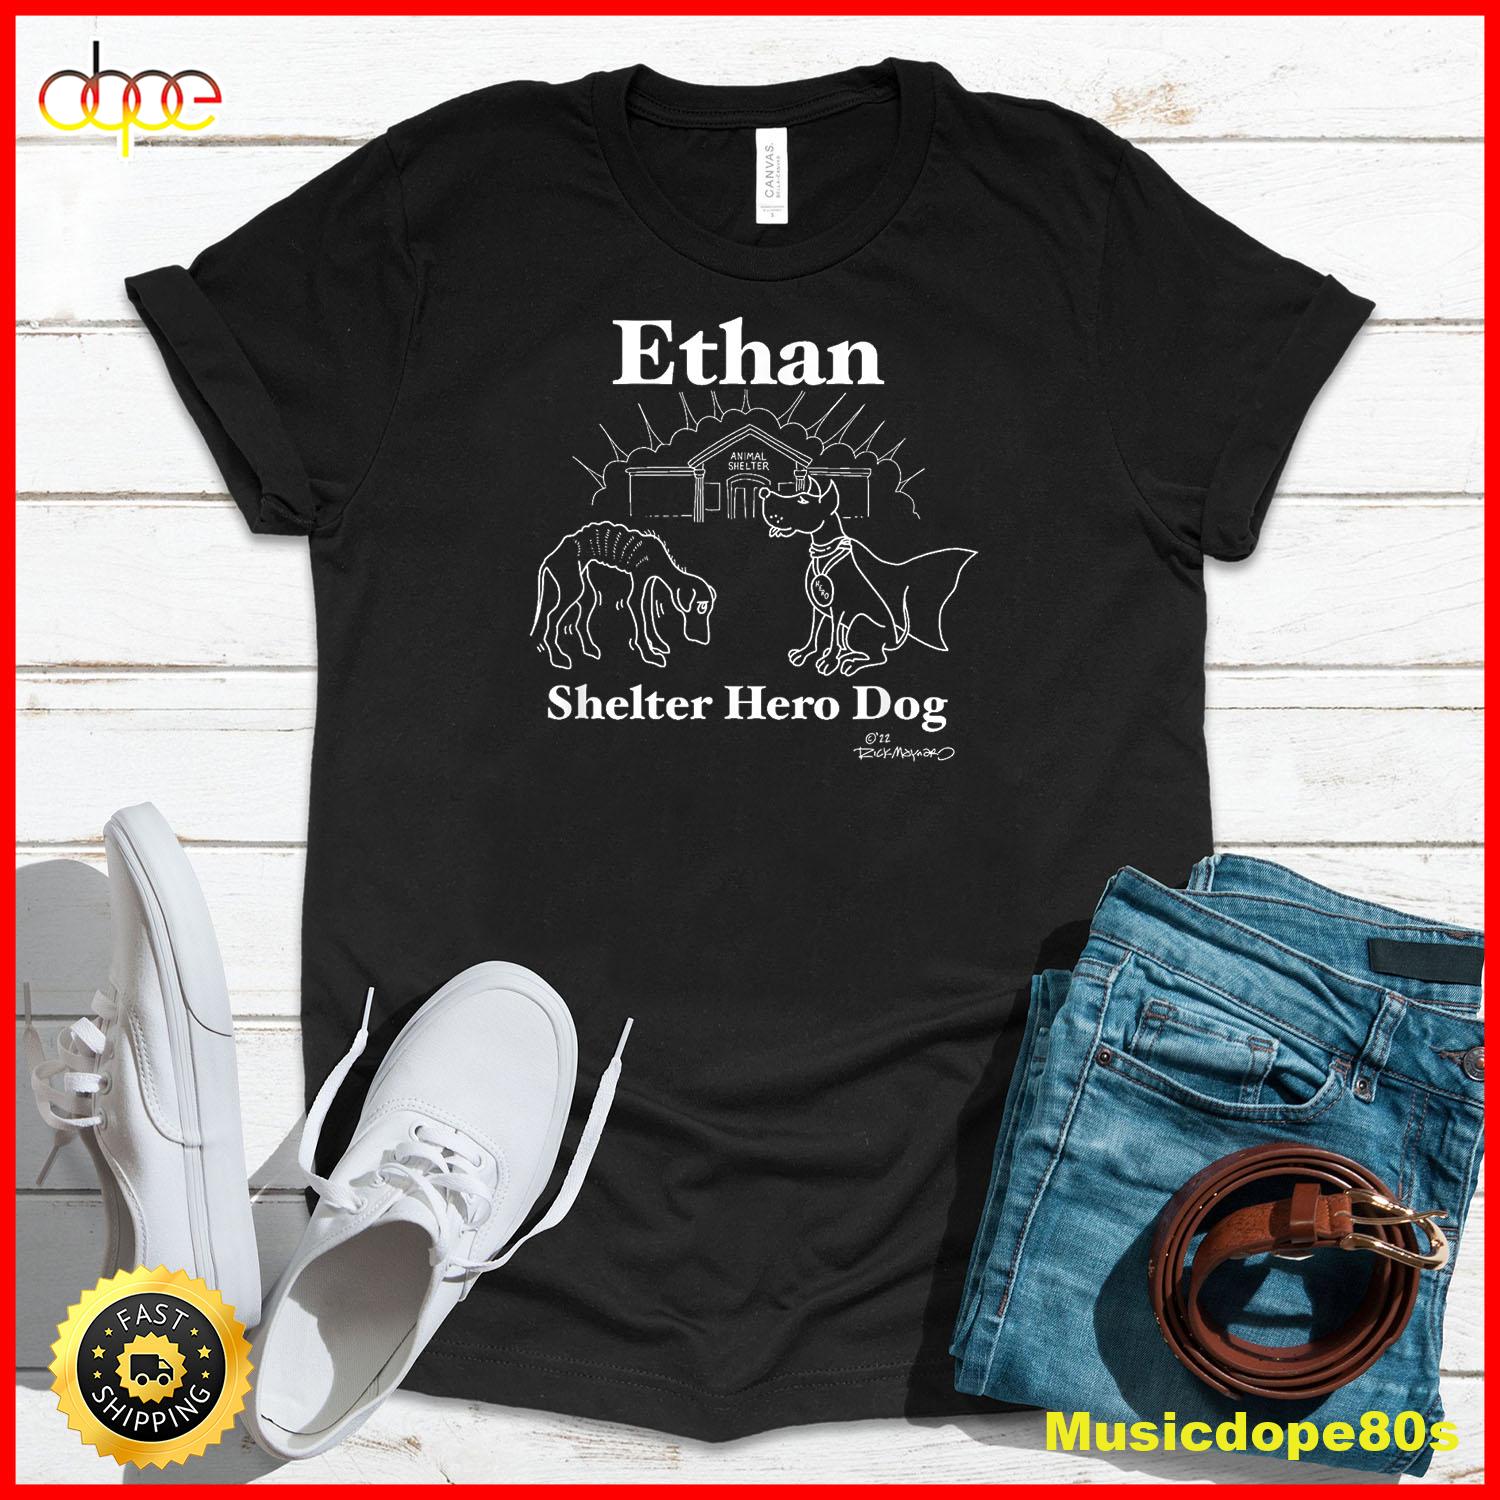 EthanAlmighty Recognition T Shirt